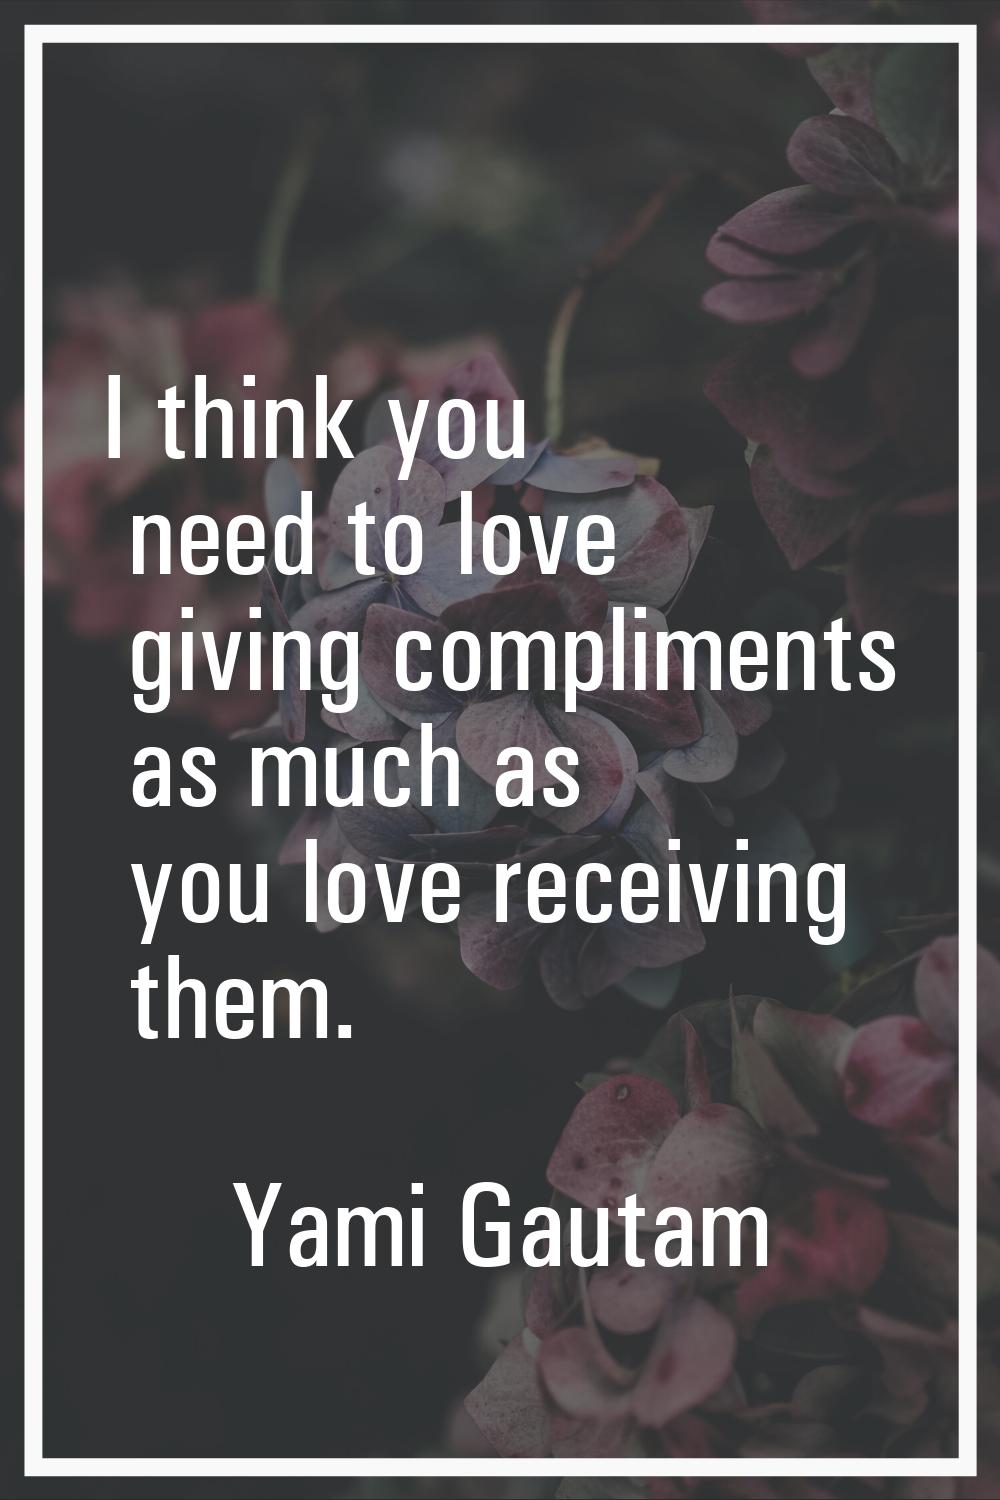 I think you need to love giving compliments as much as you love receiving them.